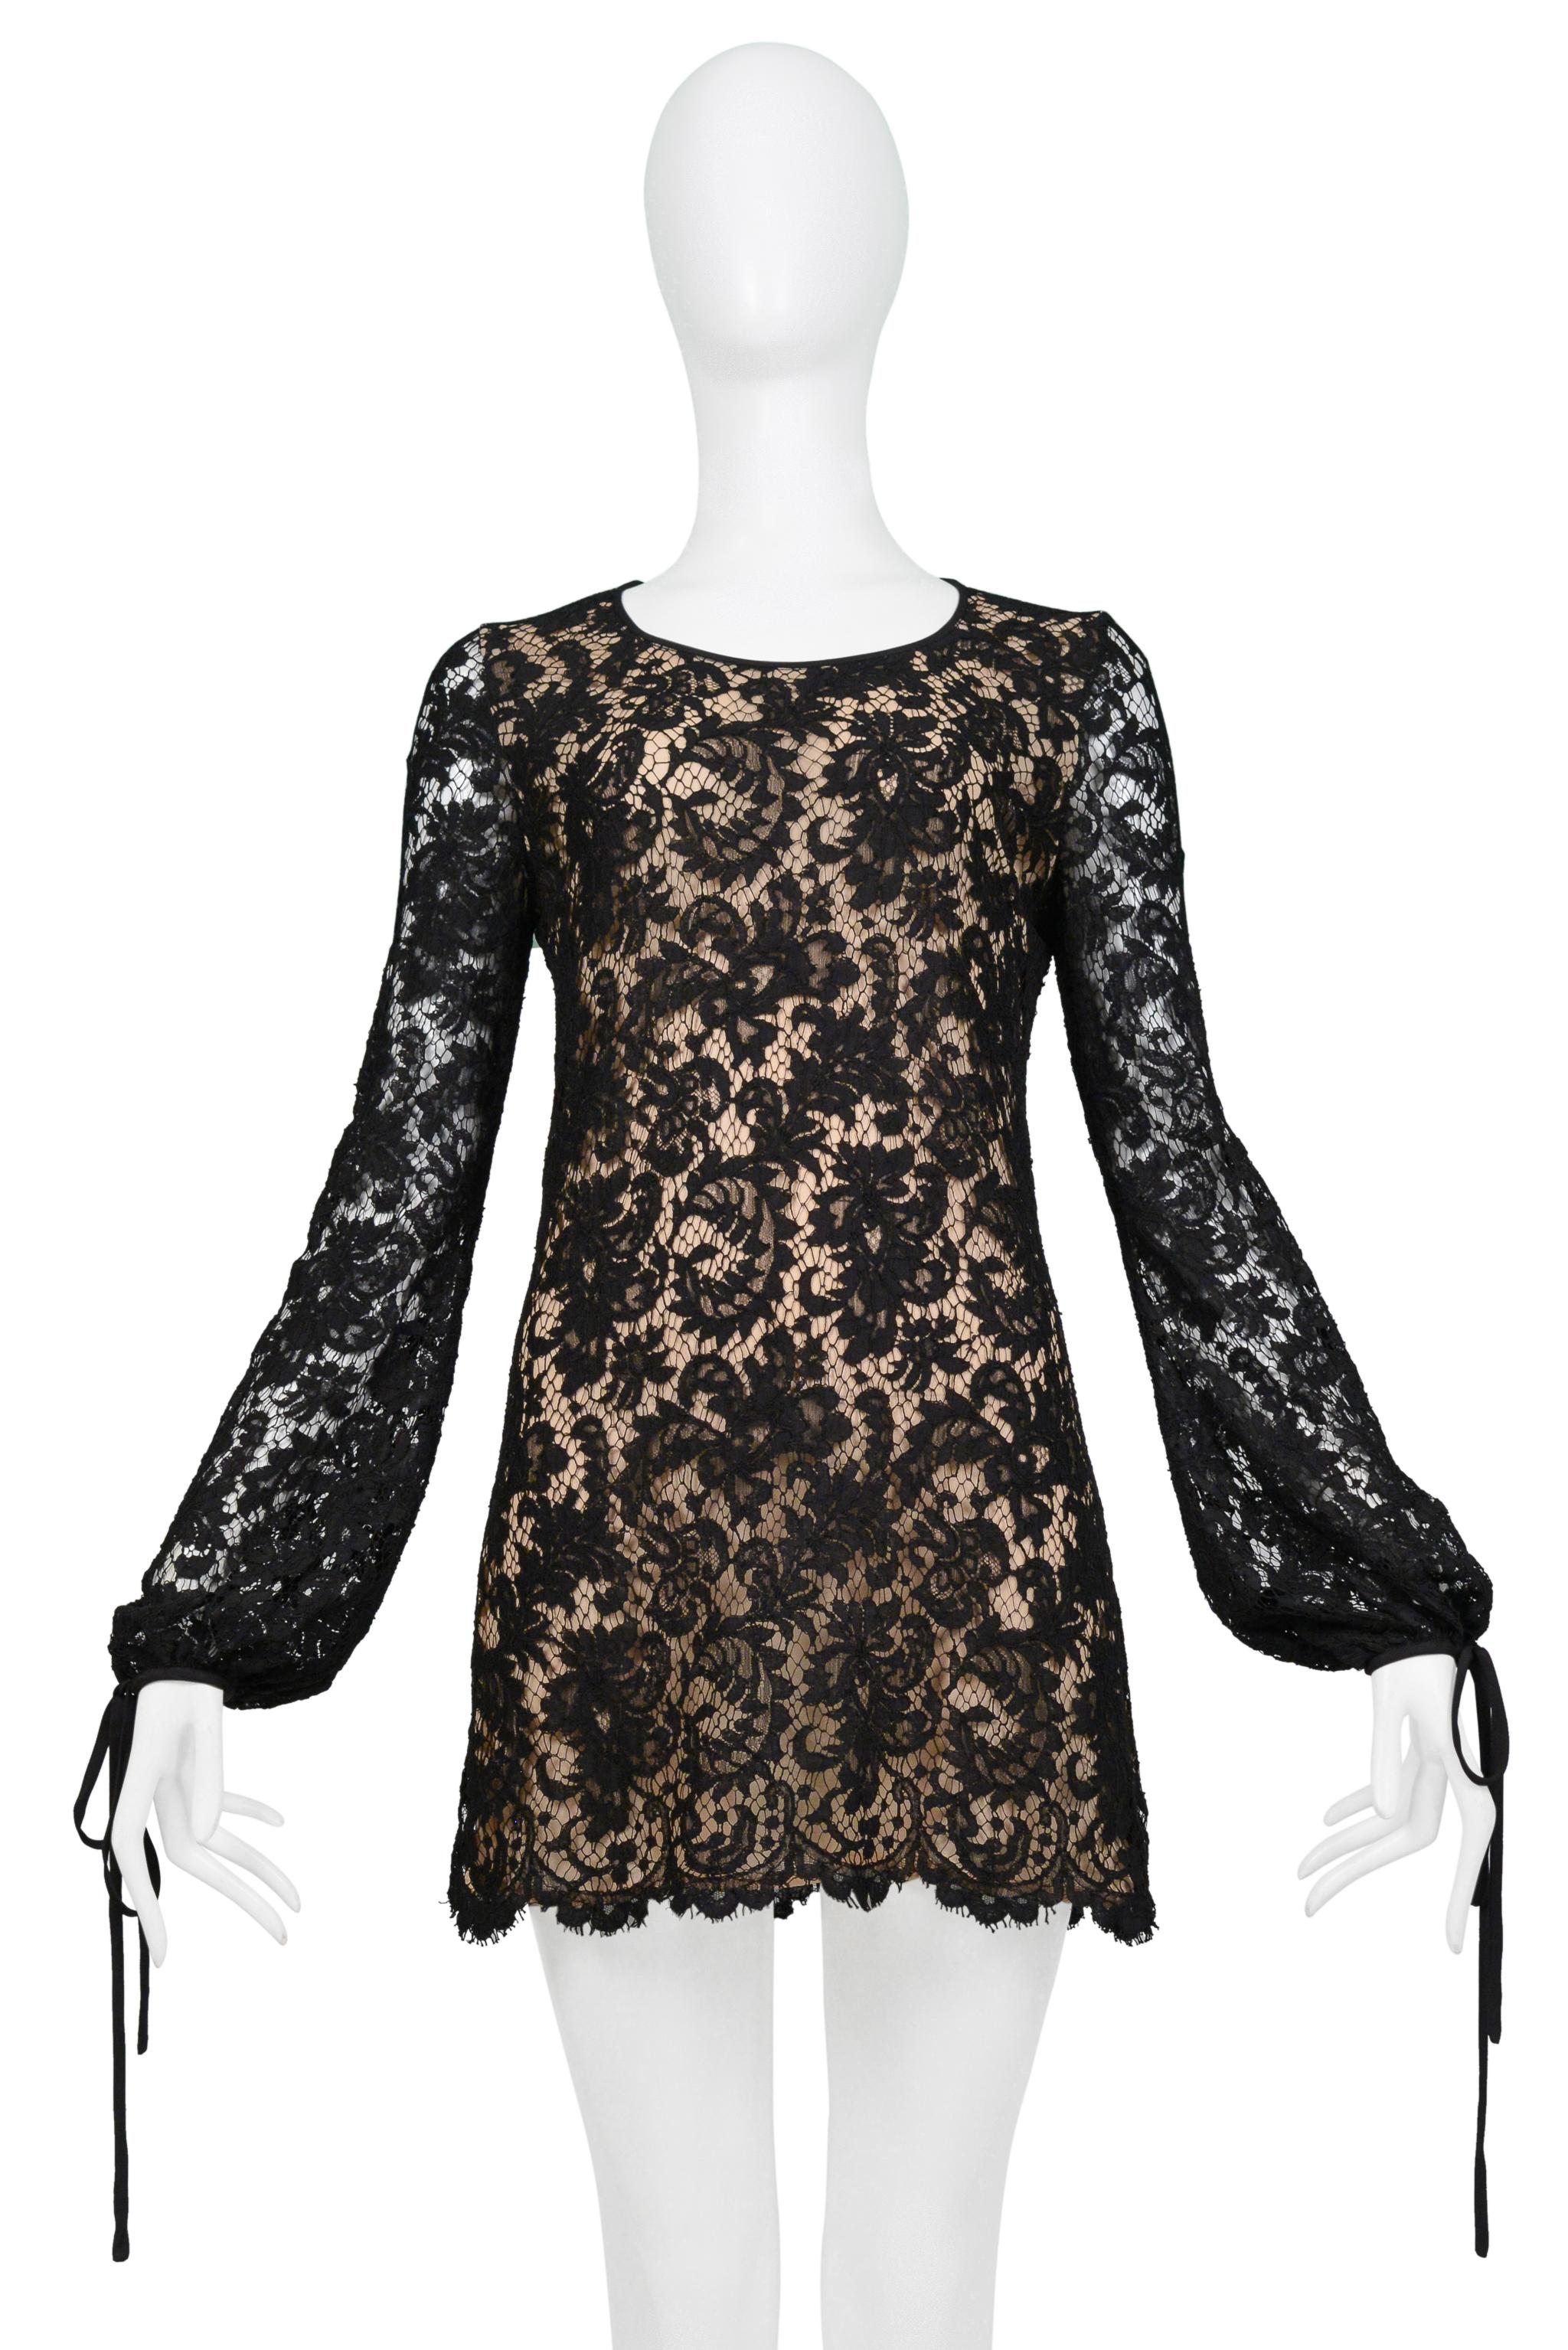 Stunning Gucci By Tom Ford 1996 Black Lace Mini Dress with Original Tags  1